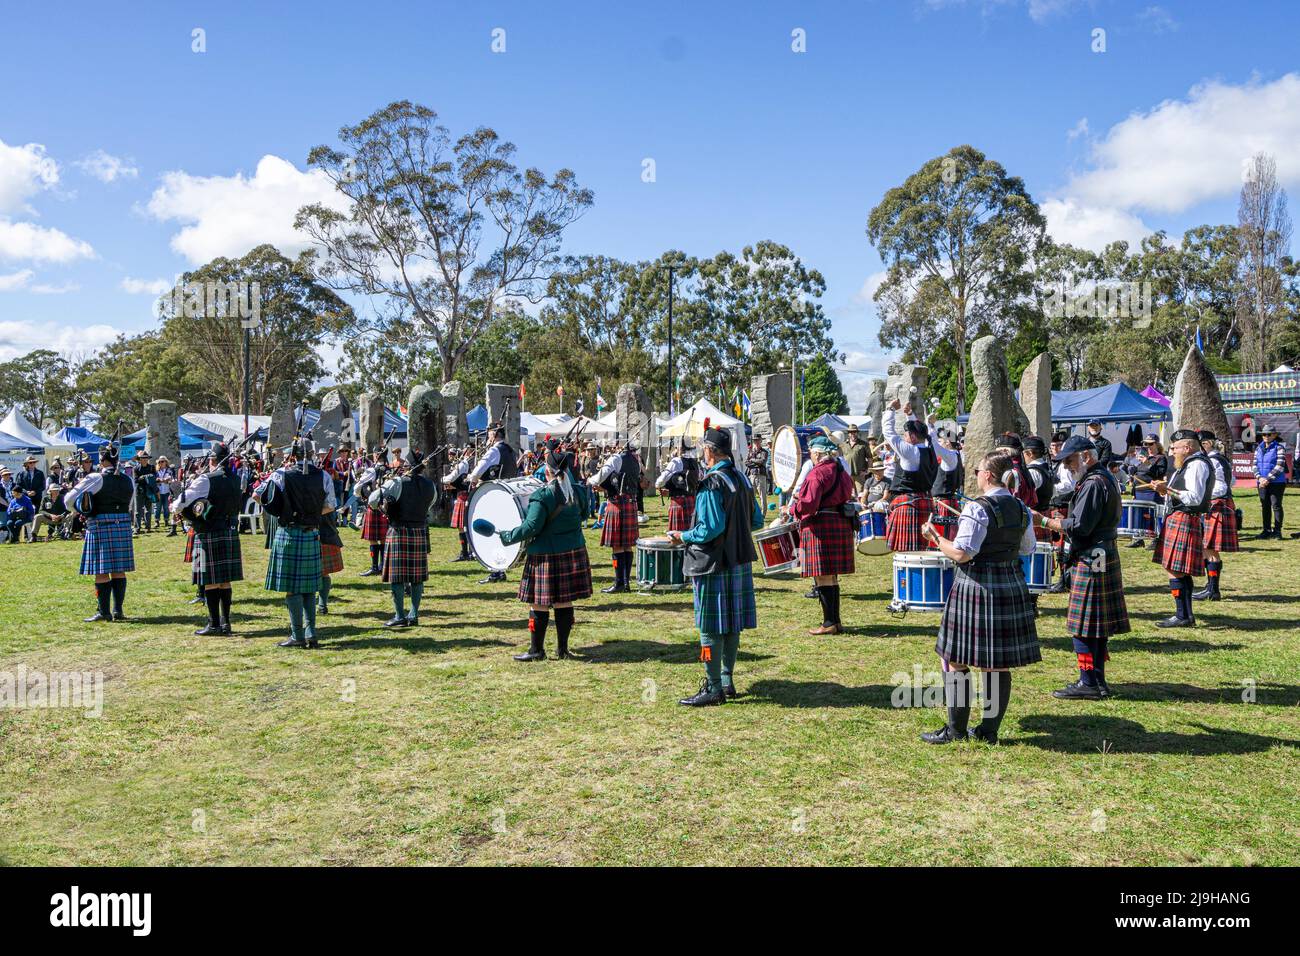 Massed pipe band on display at Standing Stones during Glen Innes Celtic Festival. NSW Australia Stock Photo